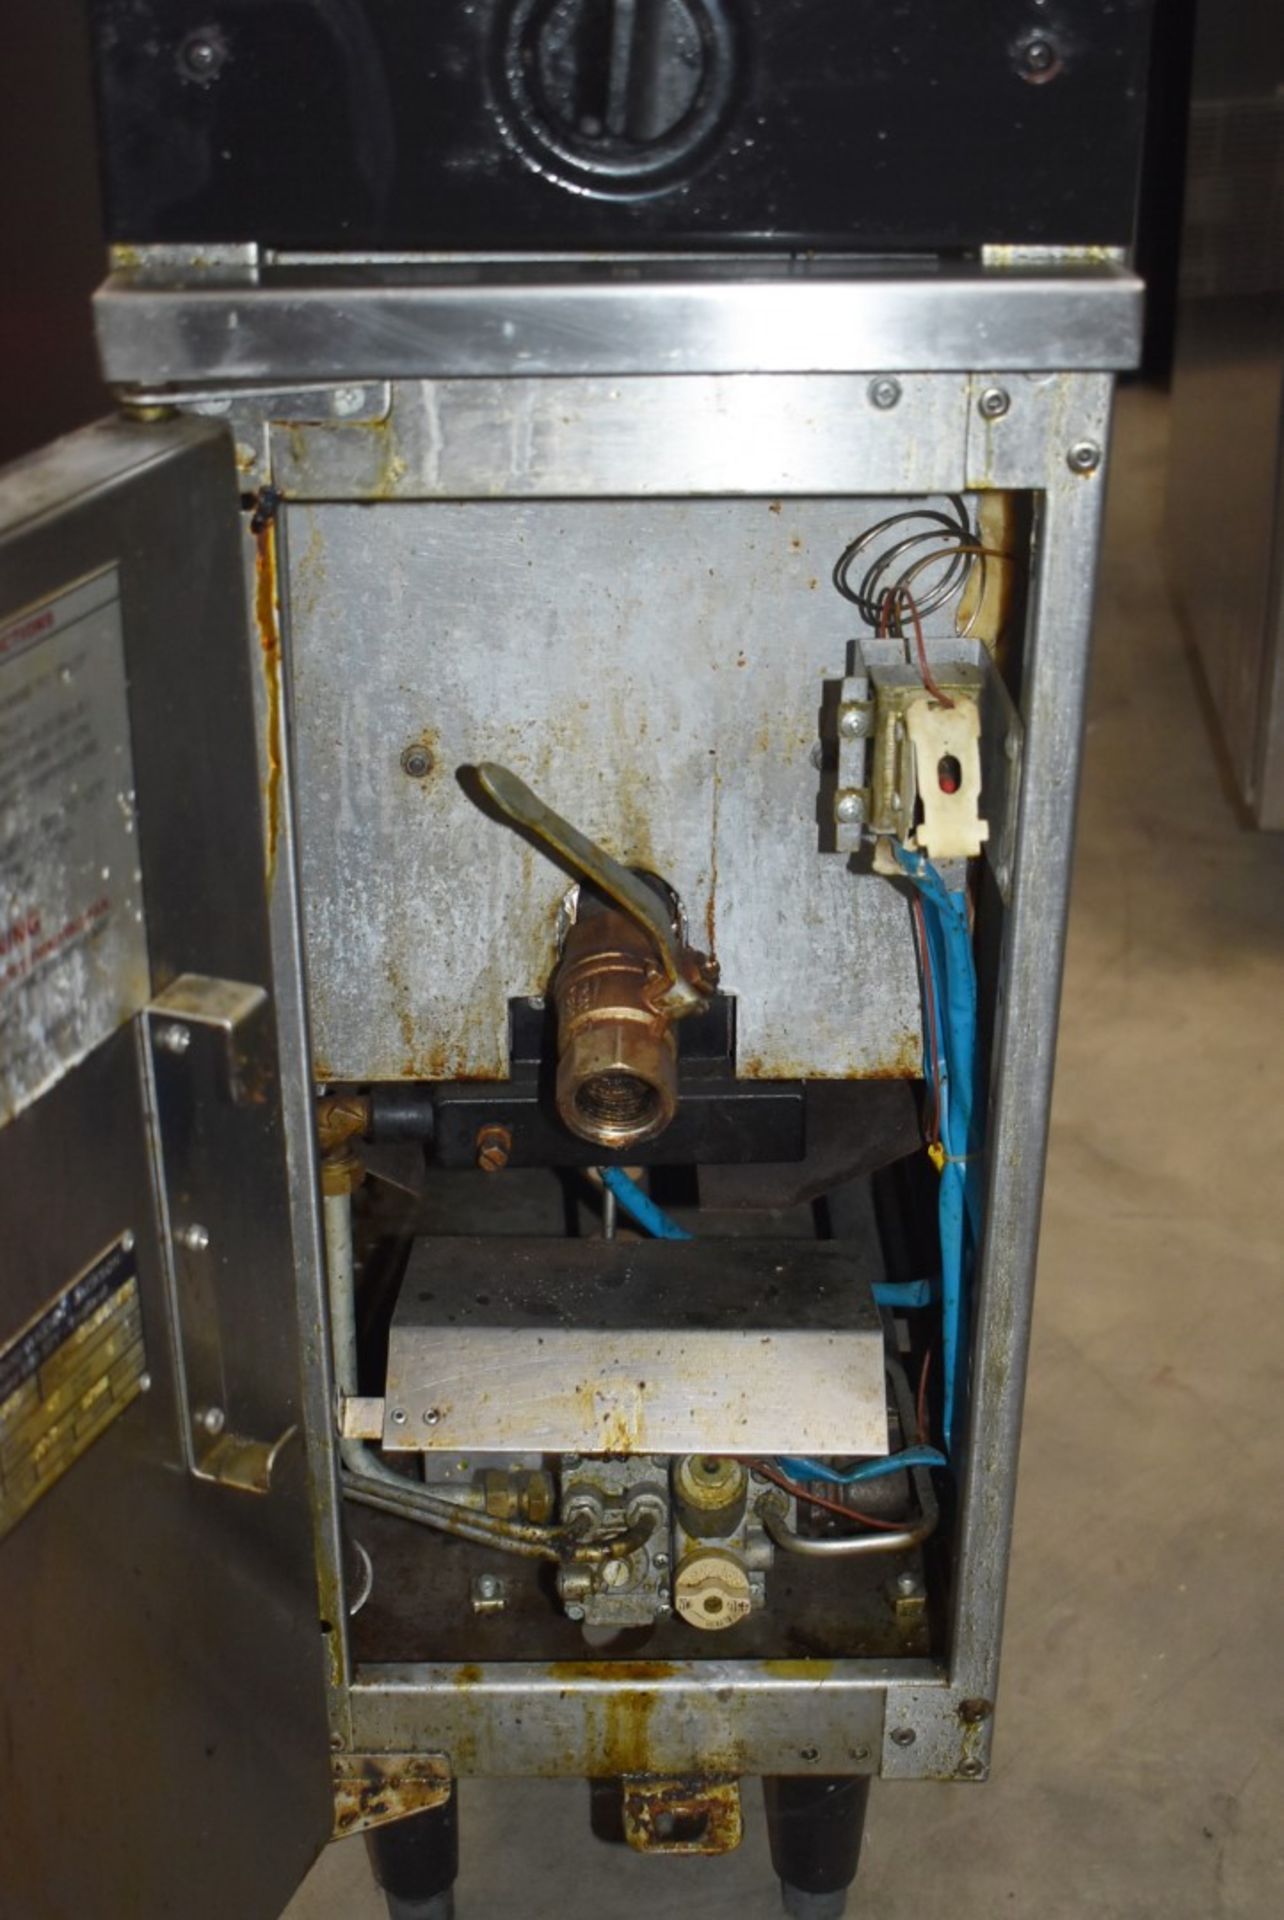 1 x Moorwood Vulcan M Line Plus Single Tank 30cm Gas Fryer - Model 30FD - Recently Removed From a - Image 7 of 12